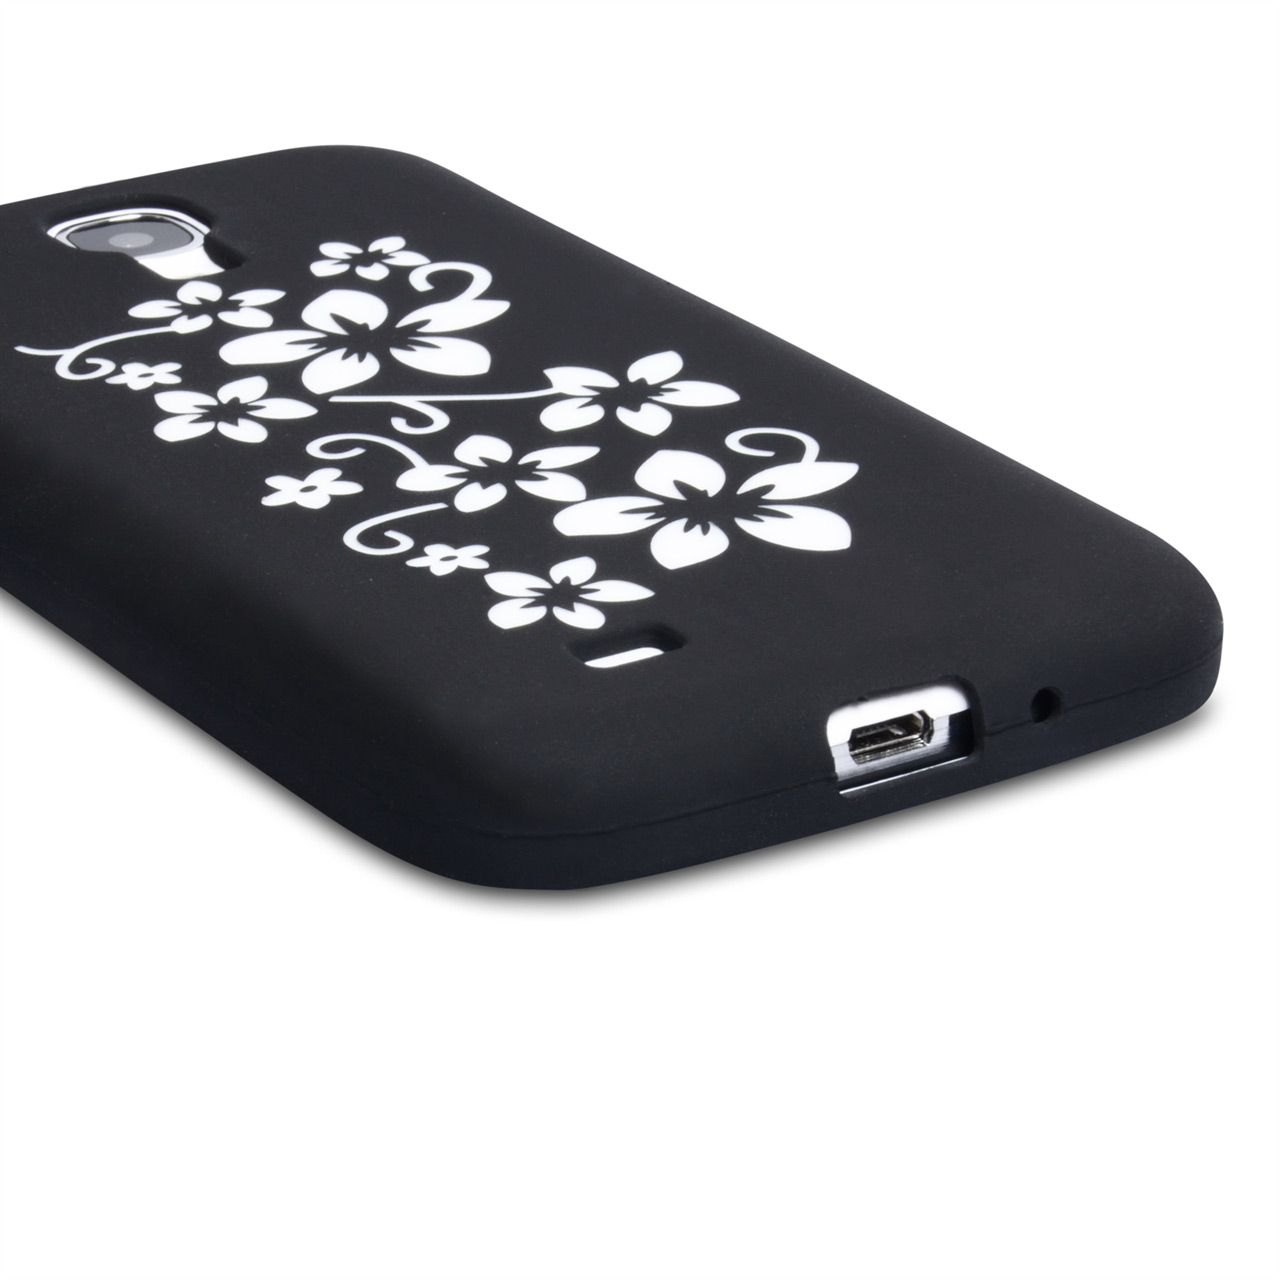 YouSave Accessories Samsung Galaxy S4 Floral Silicone Gel Case - Black